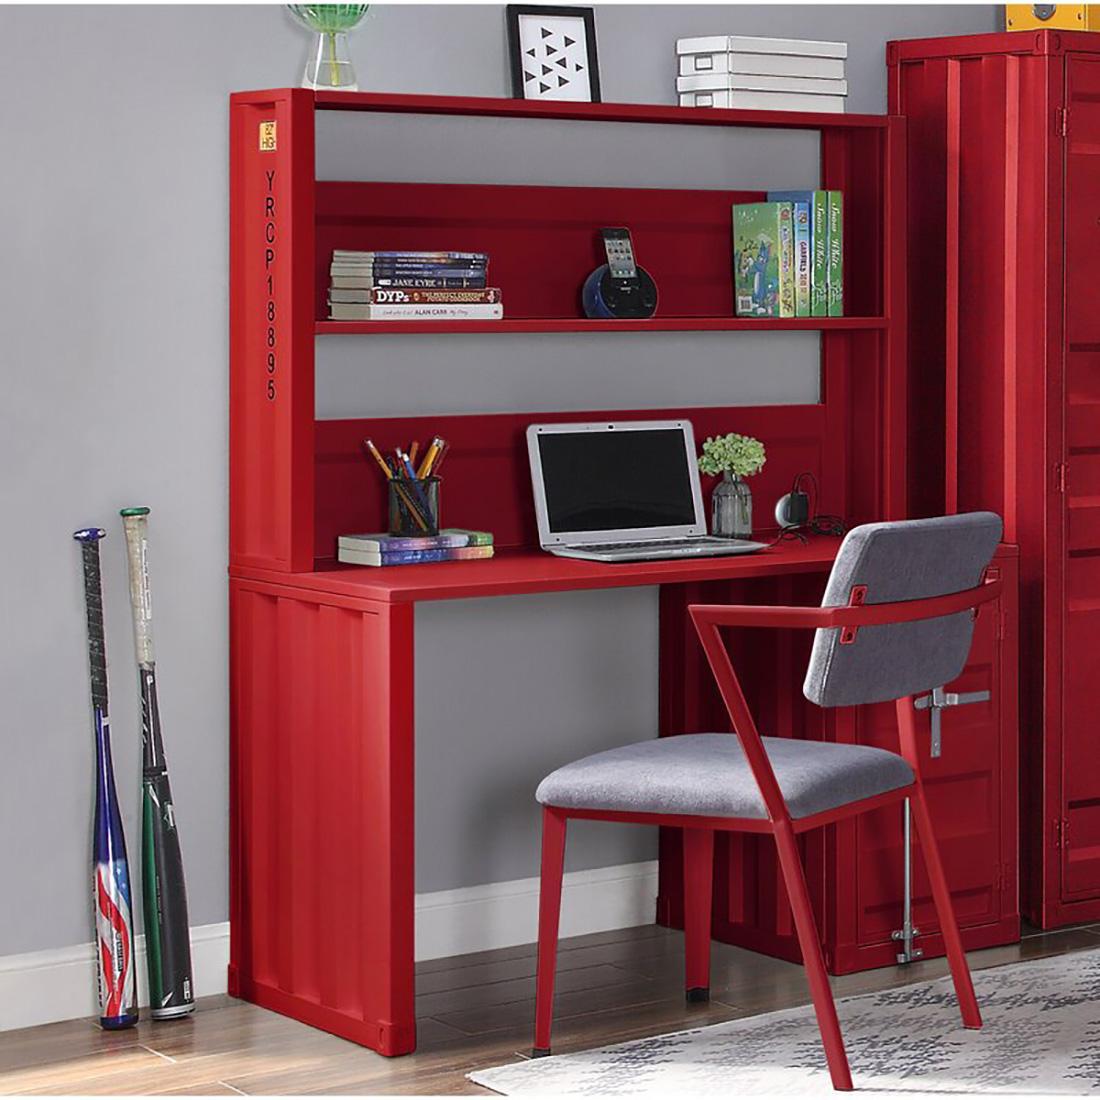 

    
Home Office Desk & Hutch Set 2Pcs Cargo Red 37917 Acme Industrial Contemporary
